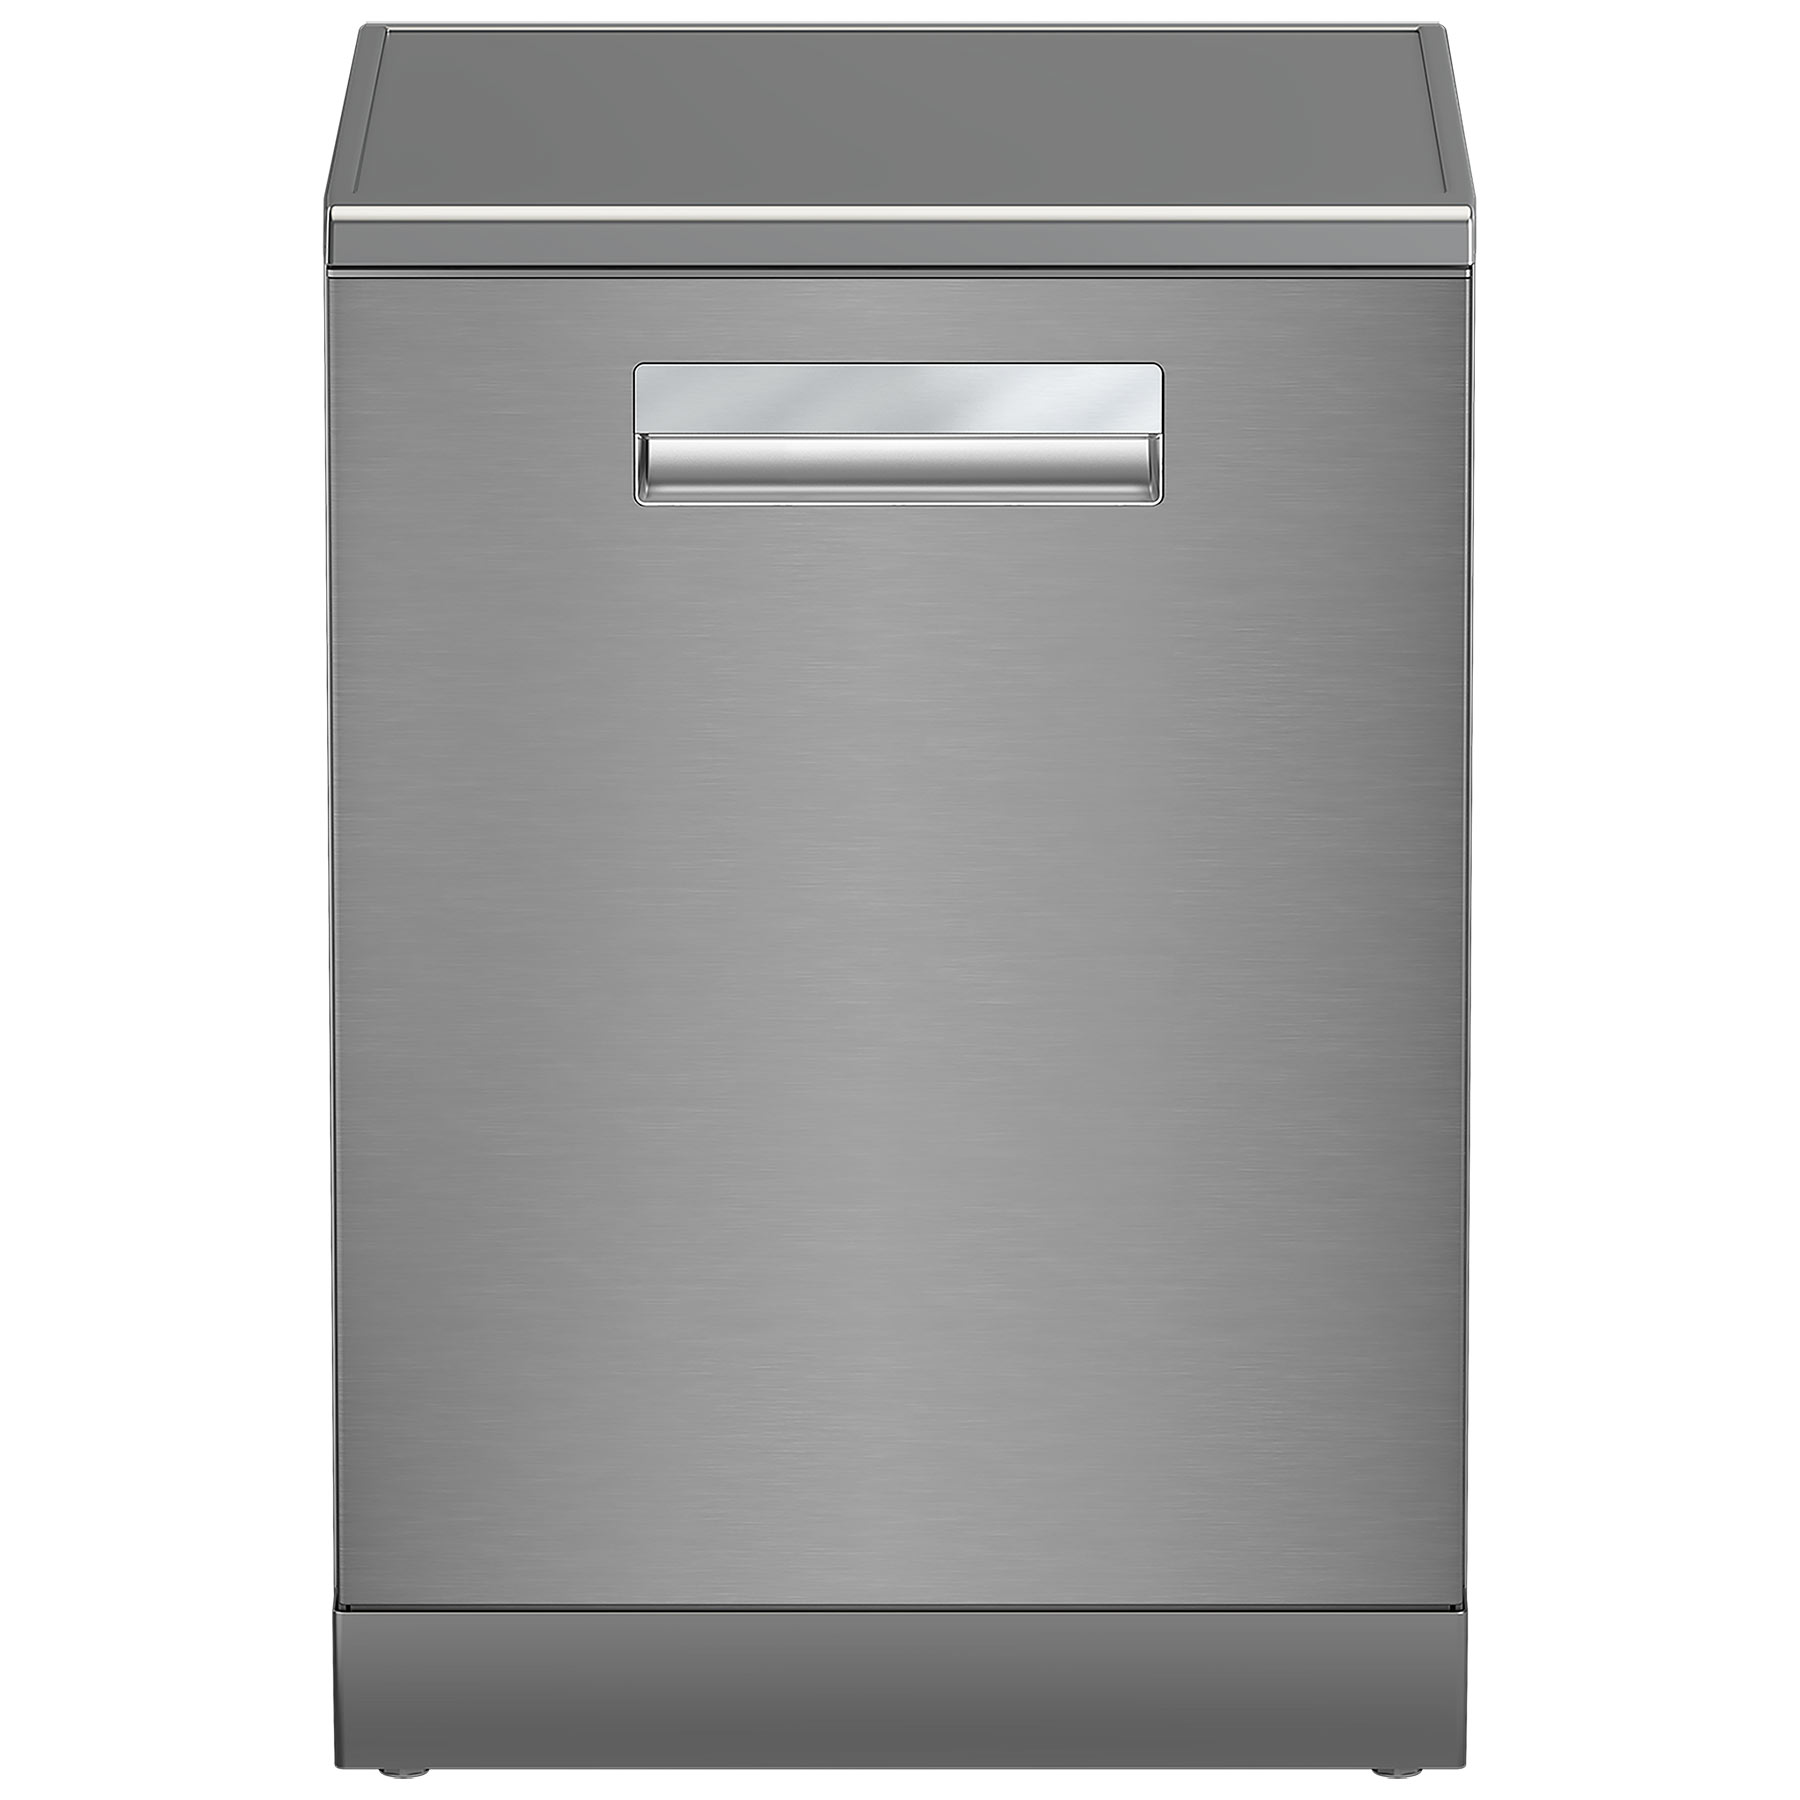 Image of Blomberg LDF63440X 60cm Dishwasher St Steel 16 Place Setting C Rated 3